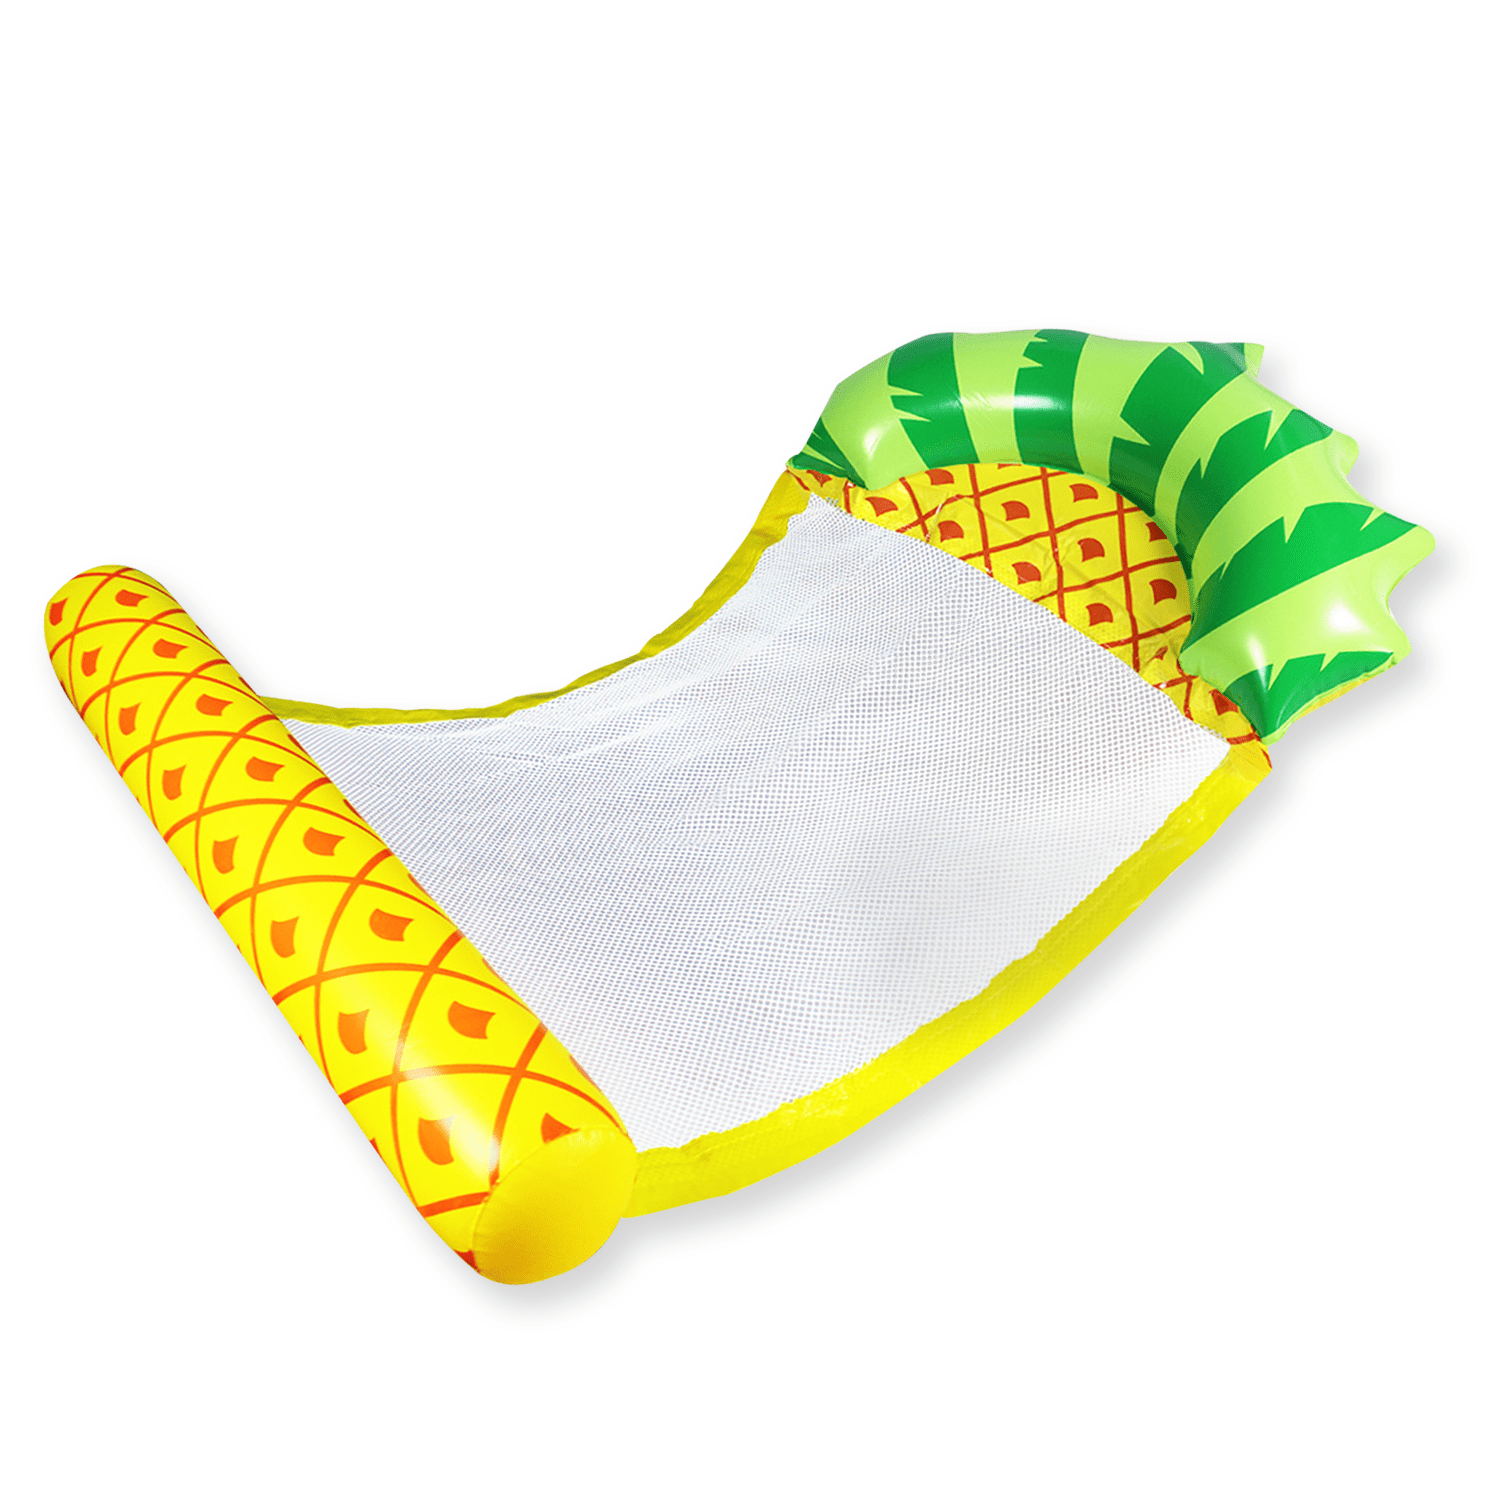 Layla Pineapple Pool Party Float Beach Pool Inflatable Floating Pool Deck Chair Decorative Toys for Adults and Children